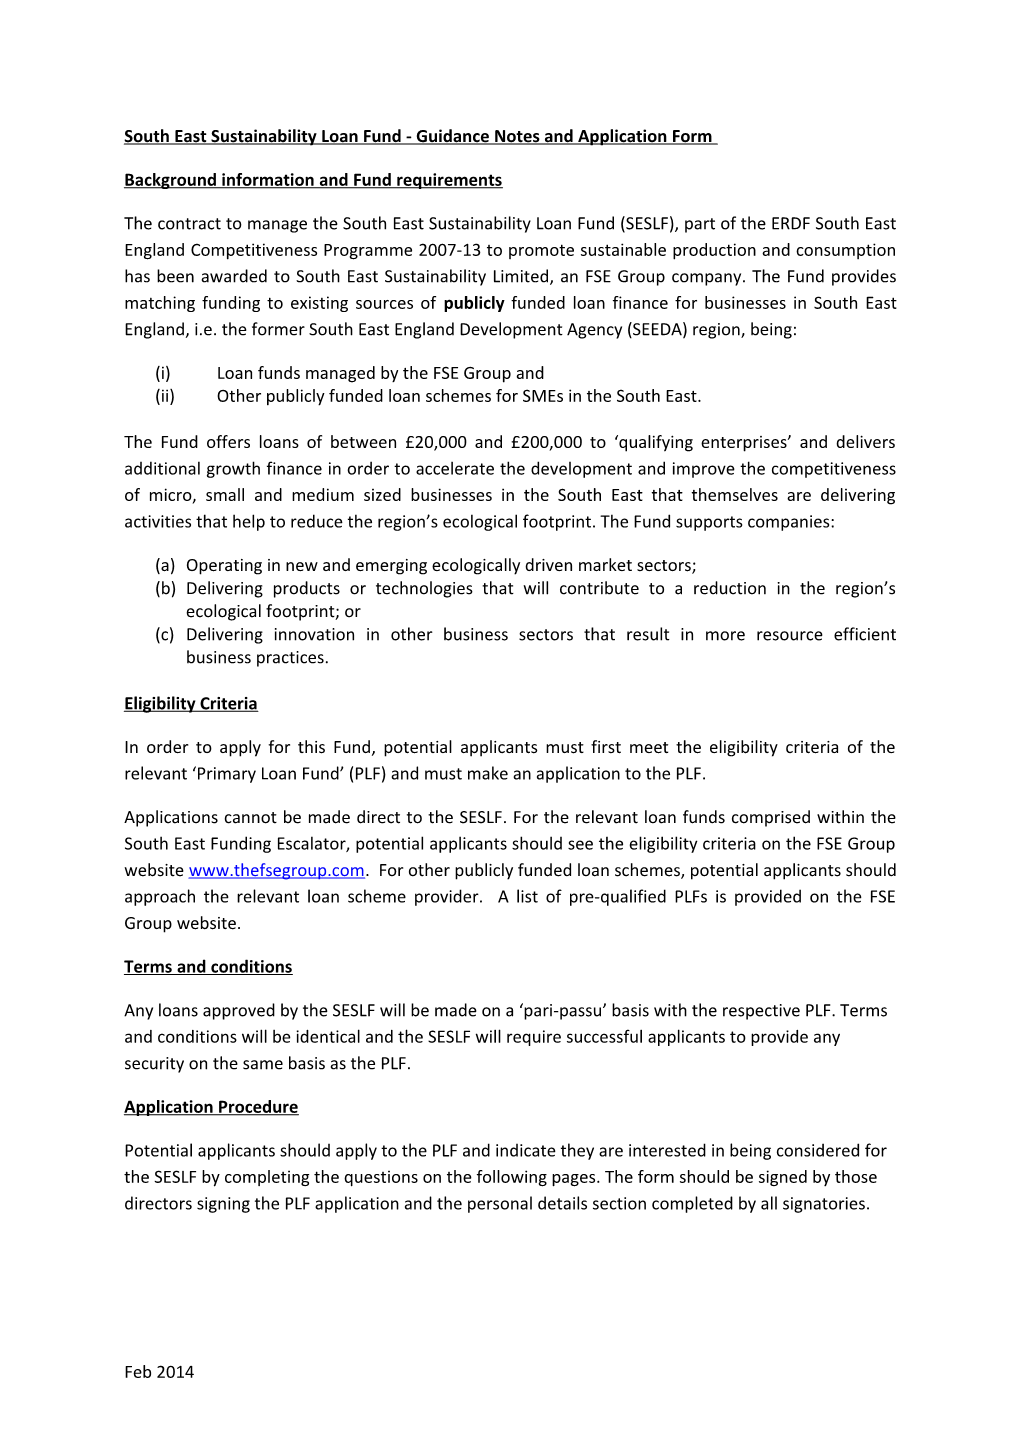 South East Sustainability Loan Fund - Guidance Notes and Application Form